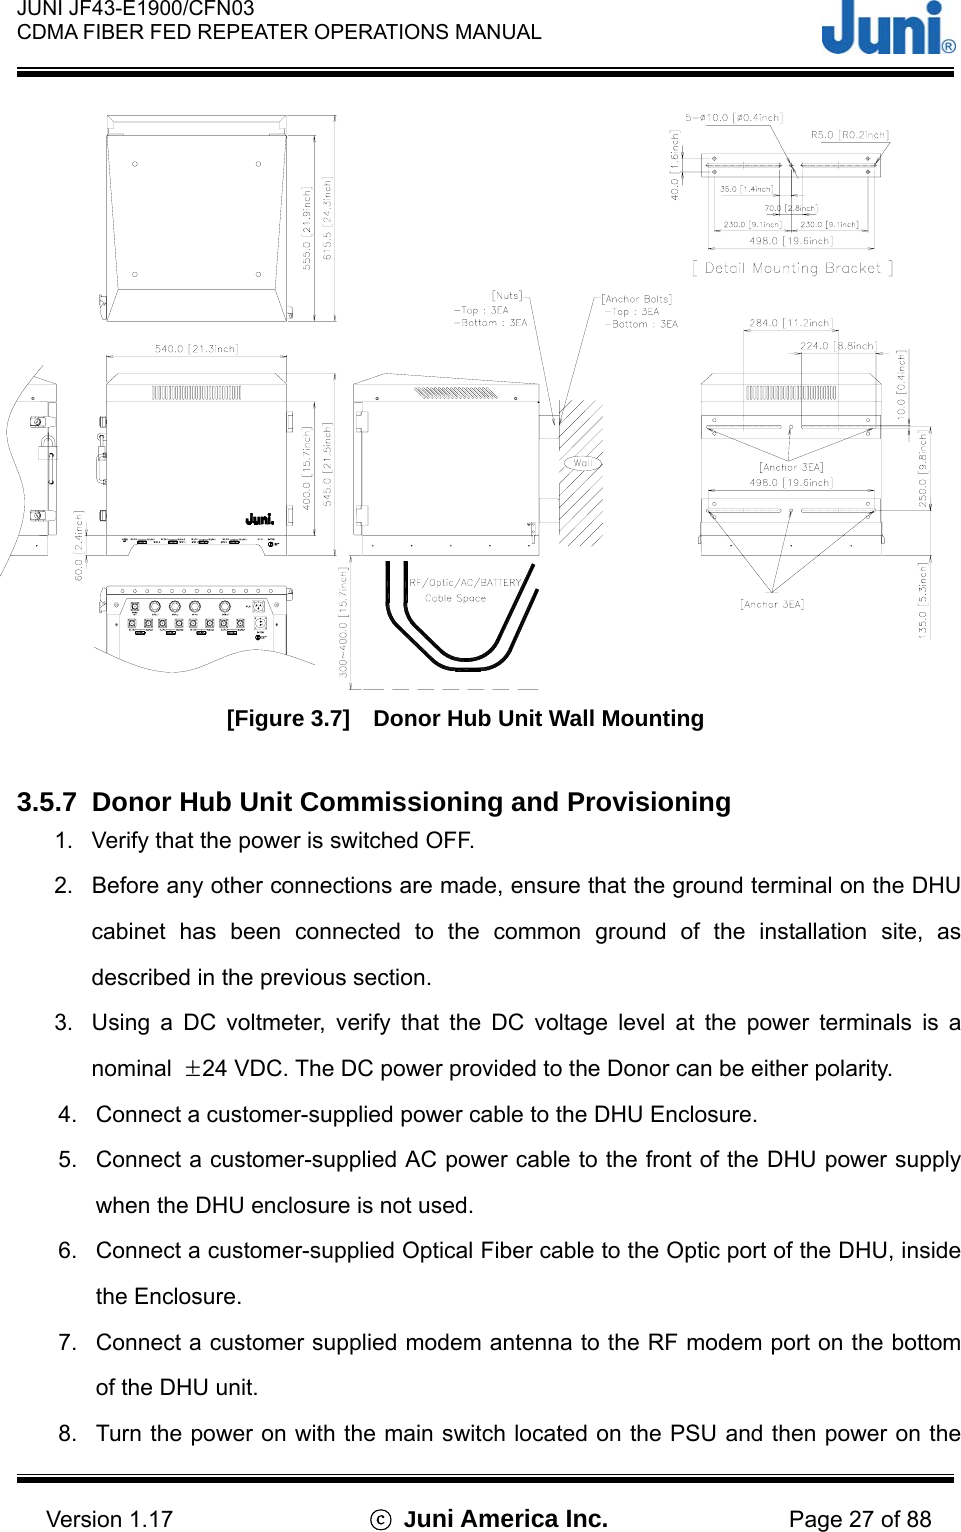  JUNI JF43-E1900/CFN03 CDMA FIBER FED REPEATER OPERATIONS MANUAL                                    Version 1.17  ⓒ Juni America Inc. Page 27 of 88  [Figure 3.7]    Donor Hub Unit Wall Mounting  3.5.7  Donor Hub Unit Commissioning and Provisioning 1.  Verify that the power is switched OFF. 2.  Before any other connections are made, ensure that the ground terminal on the DHU cabinet has been connected to the common ground of the installation site, as described in the previous section. 3.  Using a DC voltmeter, verify that the DC voltage level at the power terminals is a nominal  ±24 VDC. The DC power provided to the Donor can be either polarity. 4.  Connect a customer-supplied power cable to the DHU Enclosure. 5.  Connect a customer-supplied AC power cable to the front of the DHU power supply when the DHU enclosure is not used. 6.  Connect a customer-supplied Optical Fiber cable to the Optic port of the DHU, inside the Enclosure. 7.  Connect a customer supplied modem antenna to the RF modem port on the bottom of the DHU unit. 8.  Turn the power on with the main switch located on the PSU and then power on the 